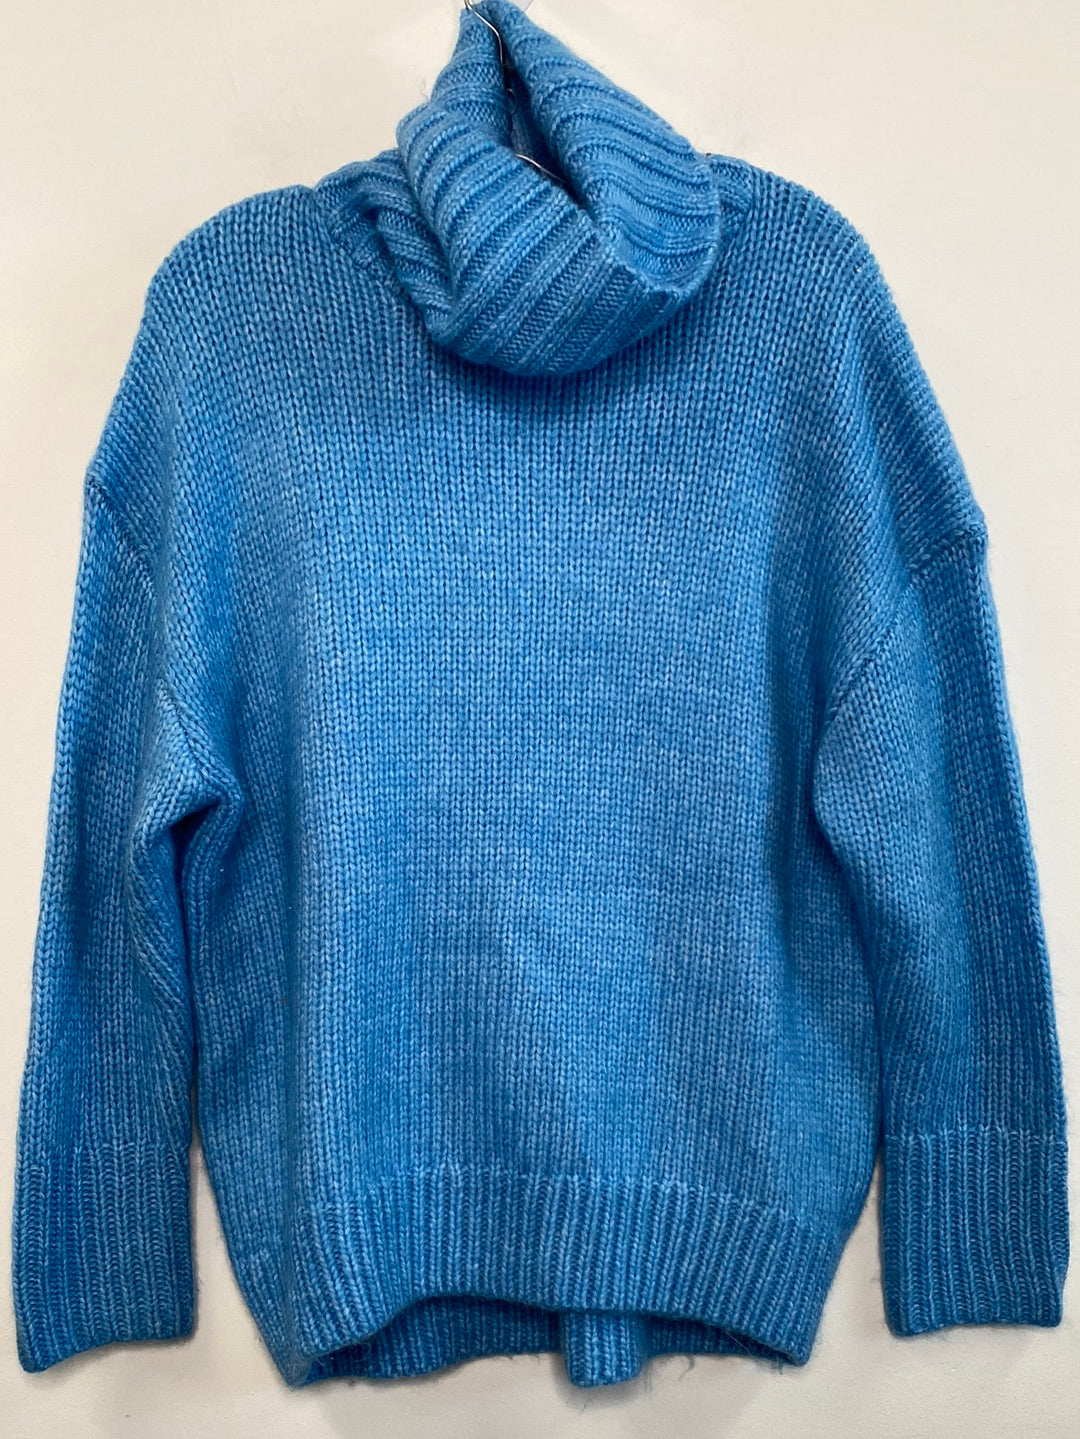 NWT American Eagle Oversized Knit Sweater (M)